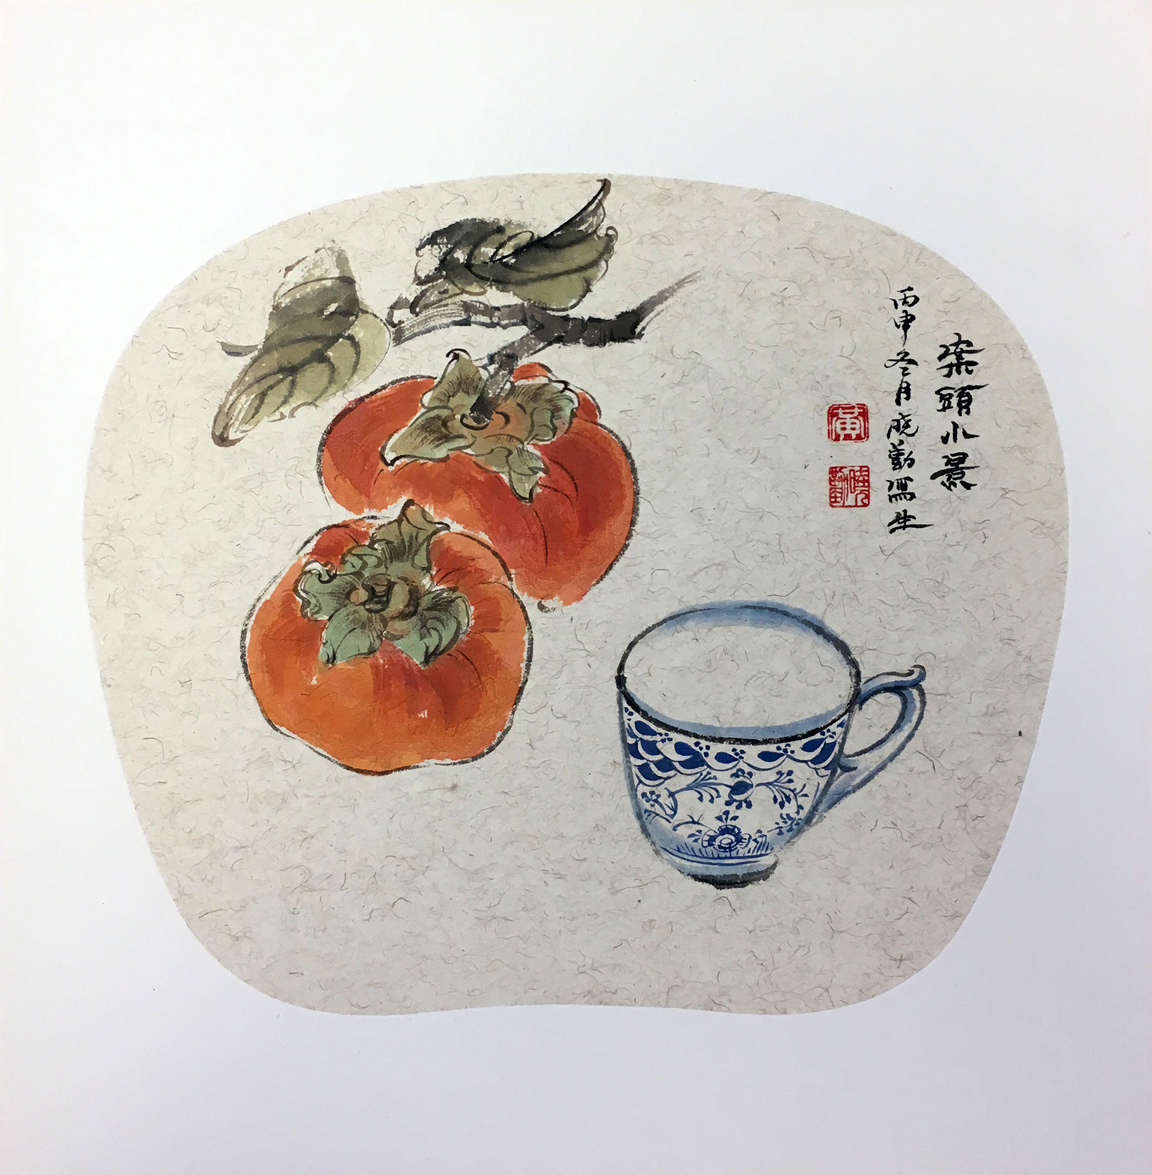 Two Persimmons and a Teacup